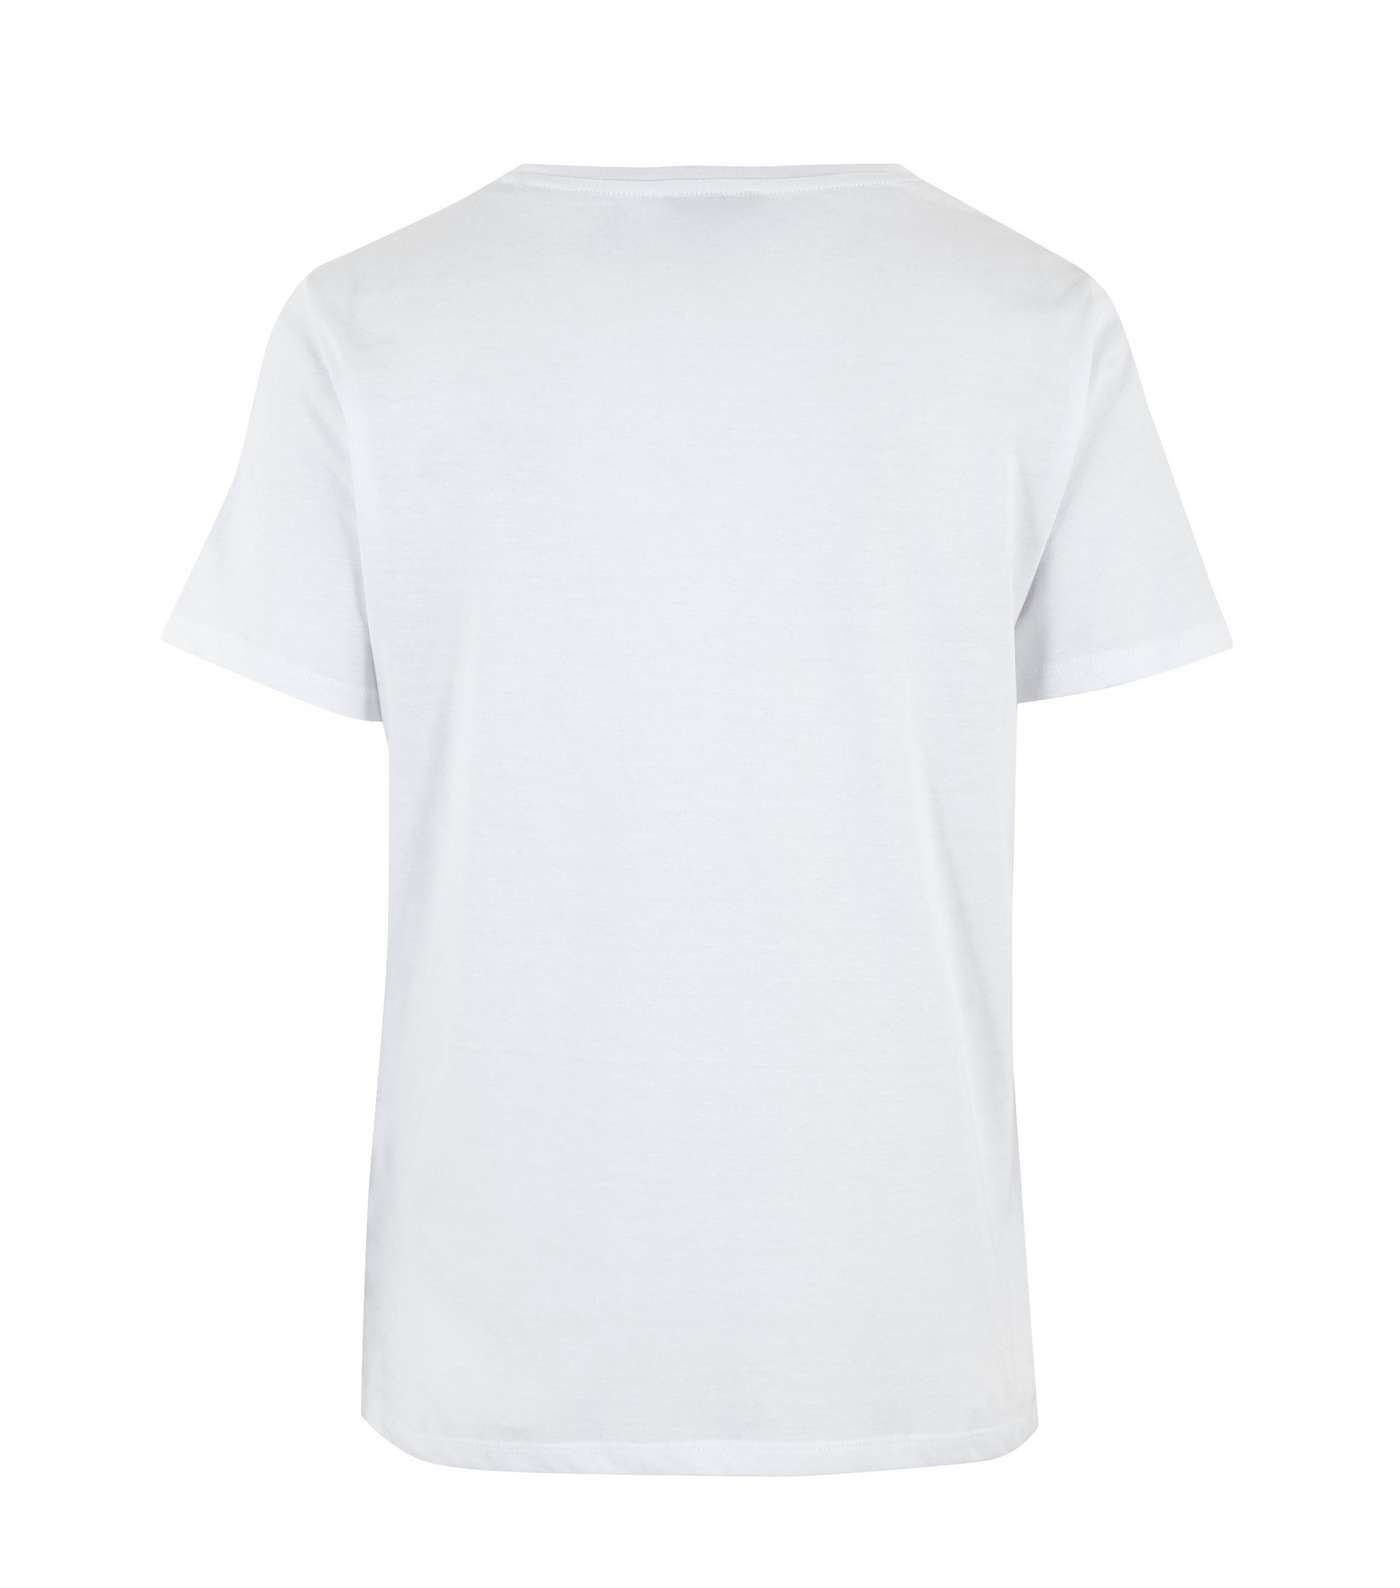 Petite White Video Call Outfit Slogan T-Shirt Image 2